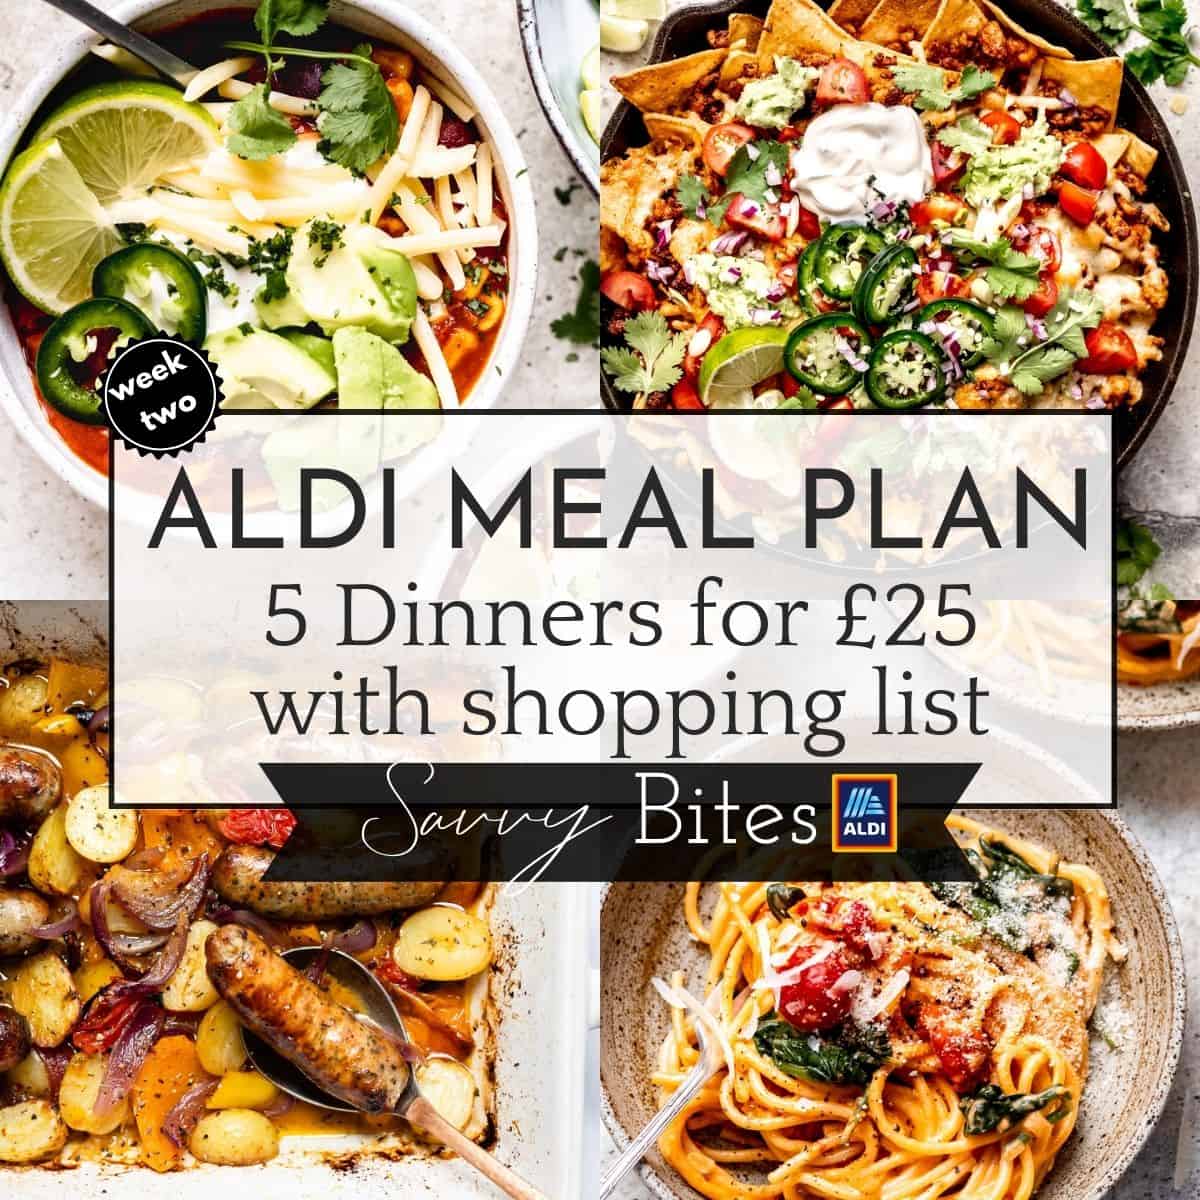 The £25 weekly meal plan with text overlay.